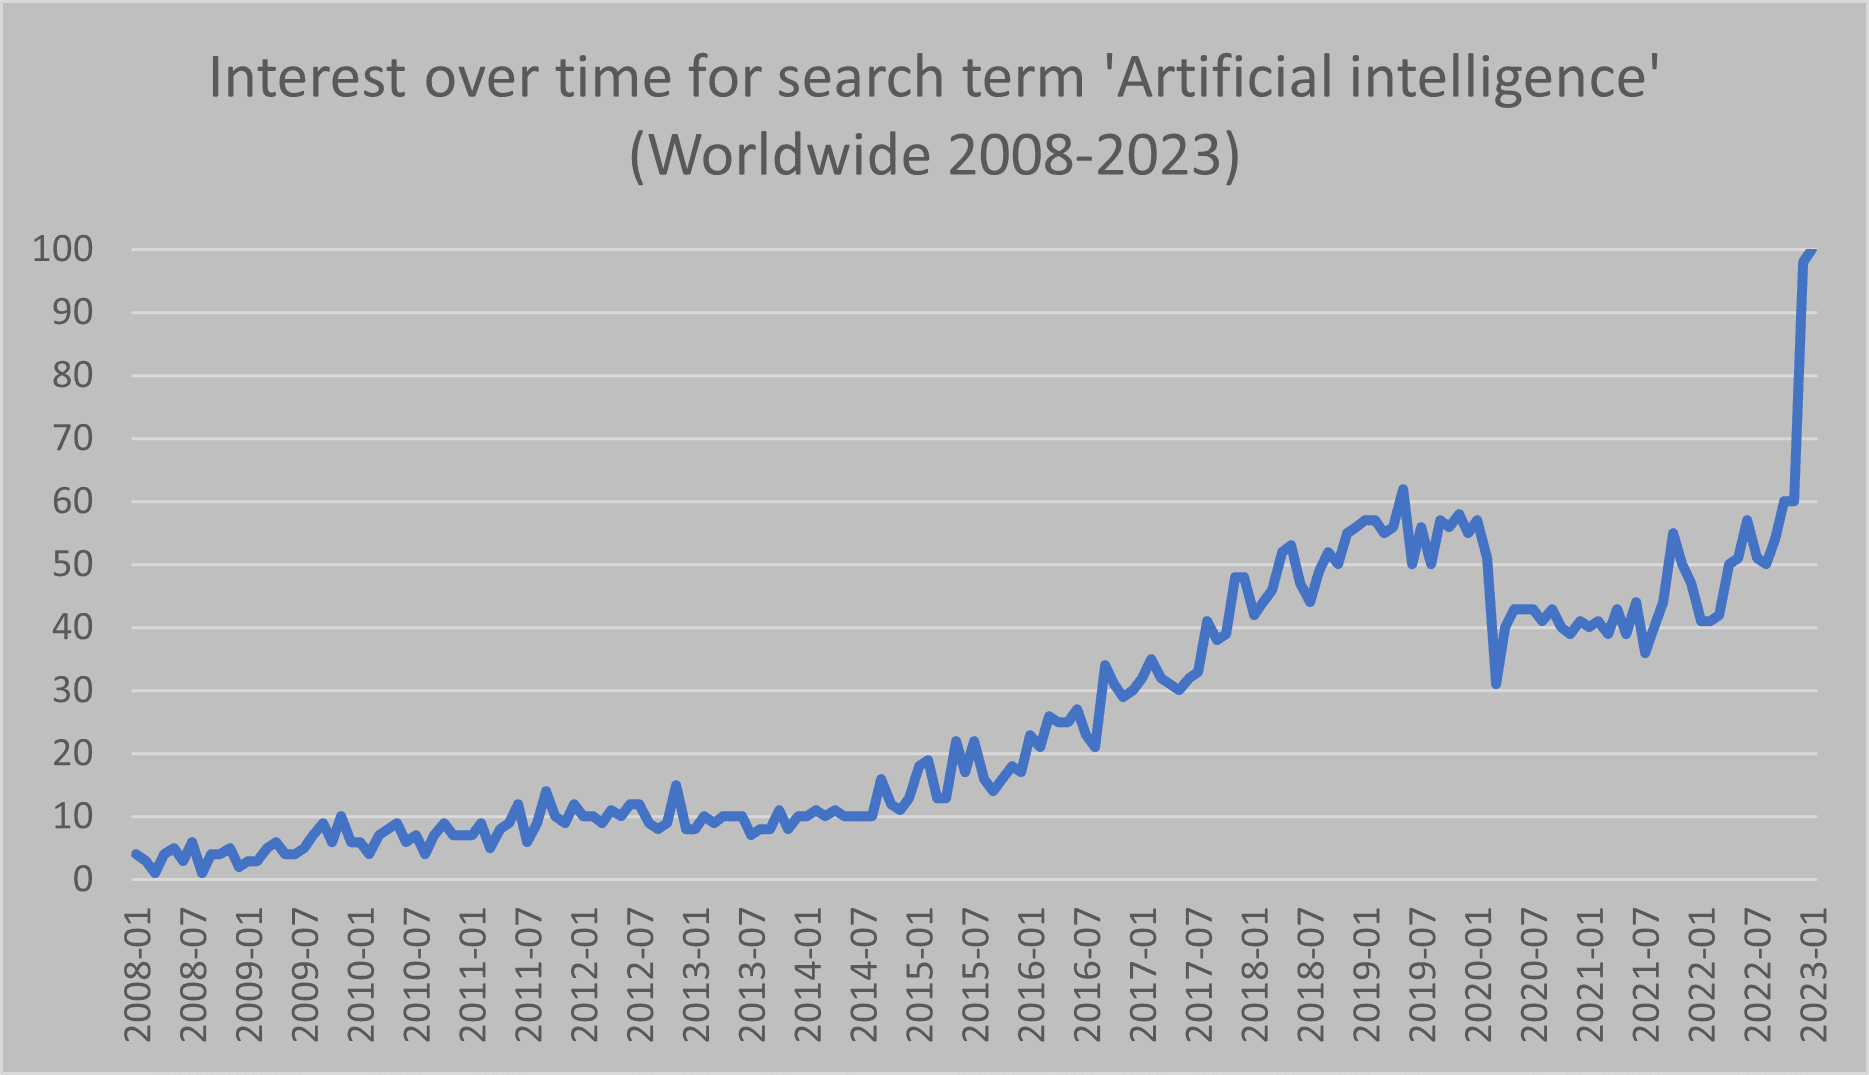 A chart showing the interest over time for the search term 'Artifical Intelligence' from 2008. the line graph shows that popularity of the search term is at an all time high as of Jan 2023.